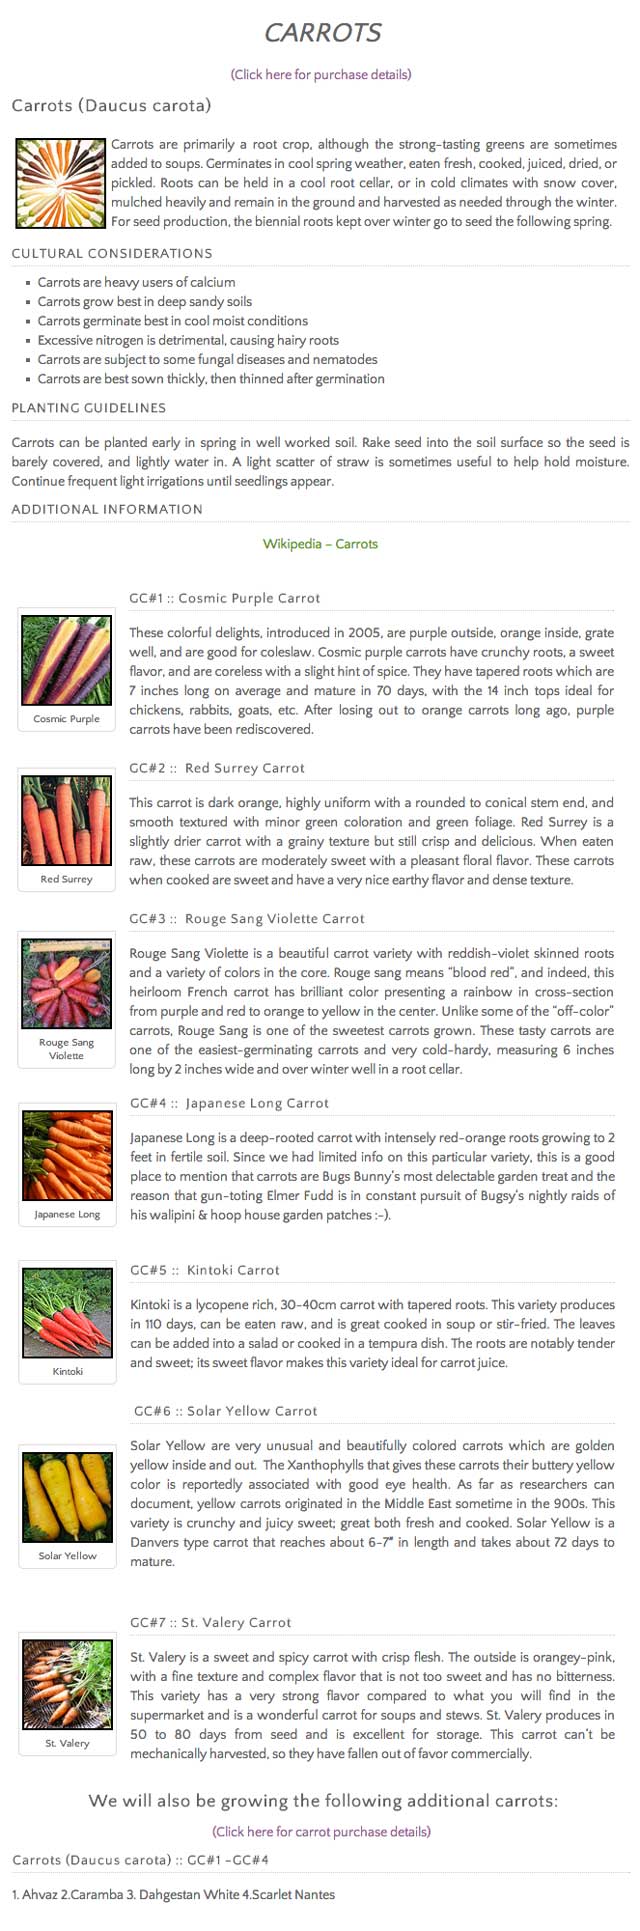 heirloom carrots, large-scale gardening, One Community